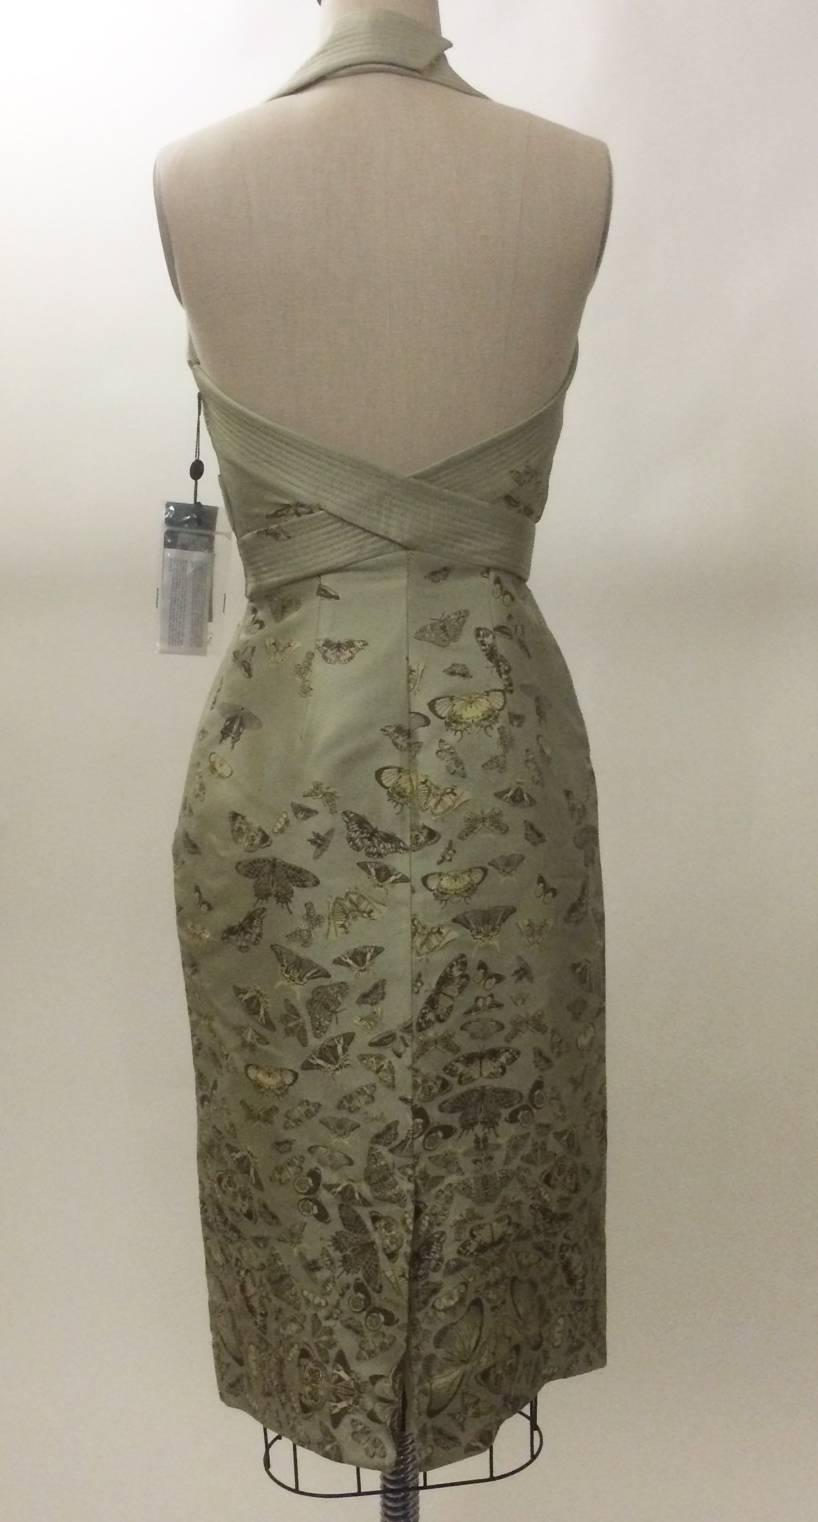 Alexander McQueen 2006 light sage green dress with butterfly (or moth?) print throughout. Halter top and low cut back. Side zip, snap and hook closures at strap.

100% silk.
Fully lined in 100% silk.

Made in Italy.

Size IT 38, usually US 2.